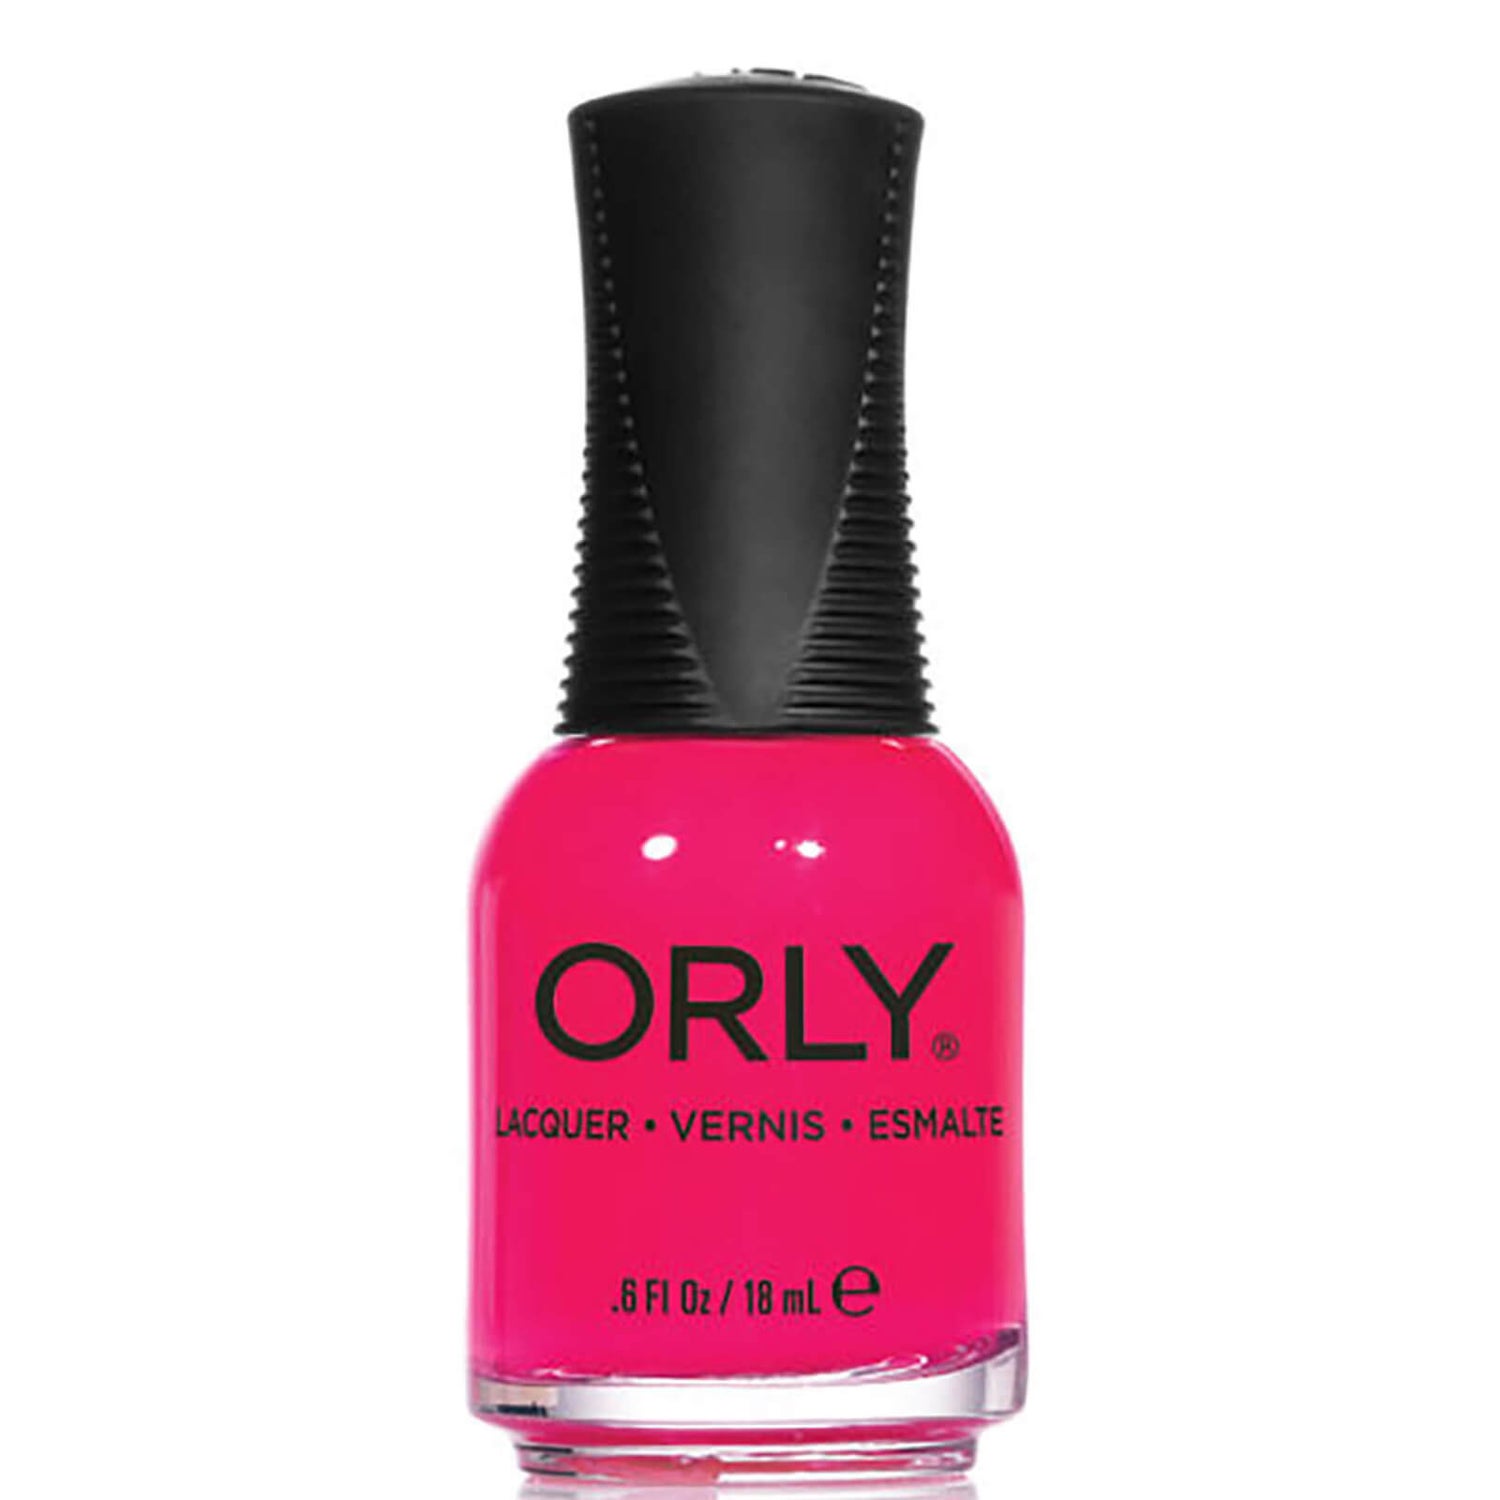 ORLY Passion Fruit Nail Lacquer (18ml)